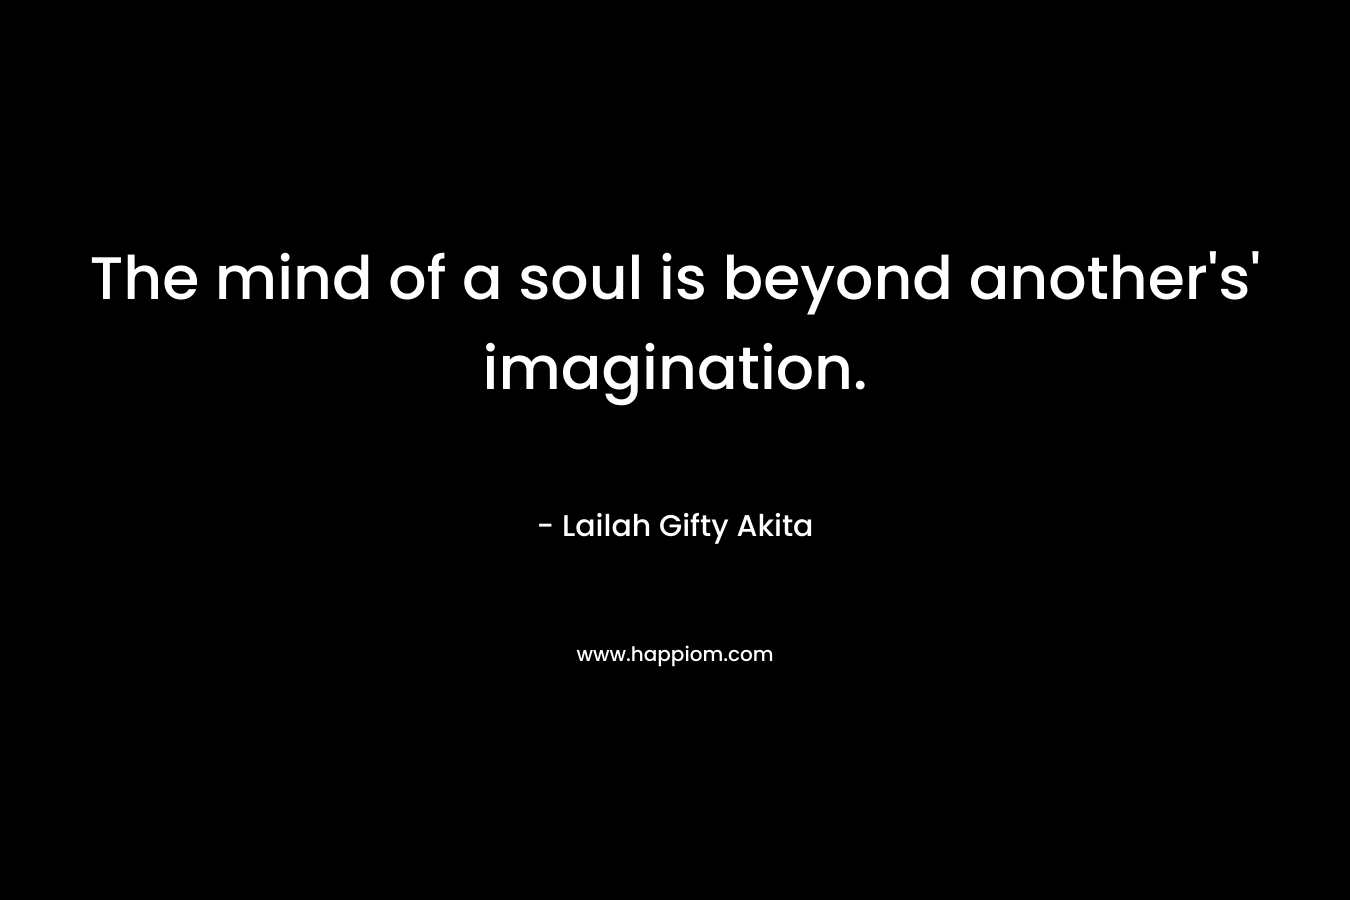 The mind of a soul is beyond another's' imagination.